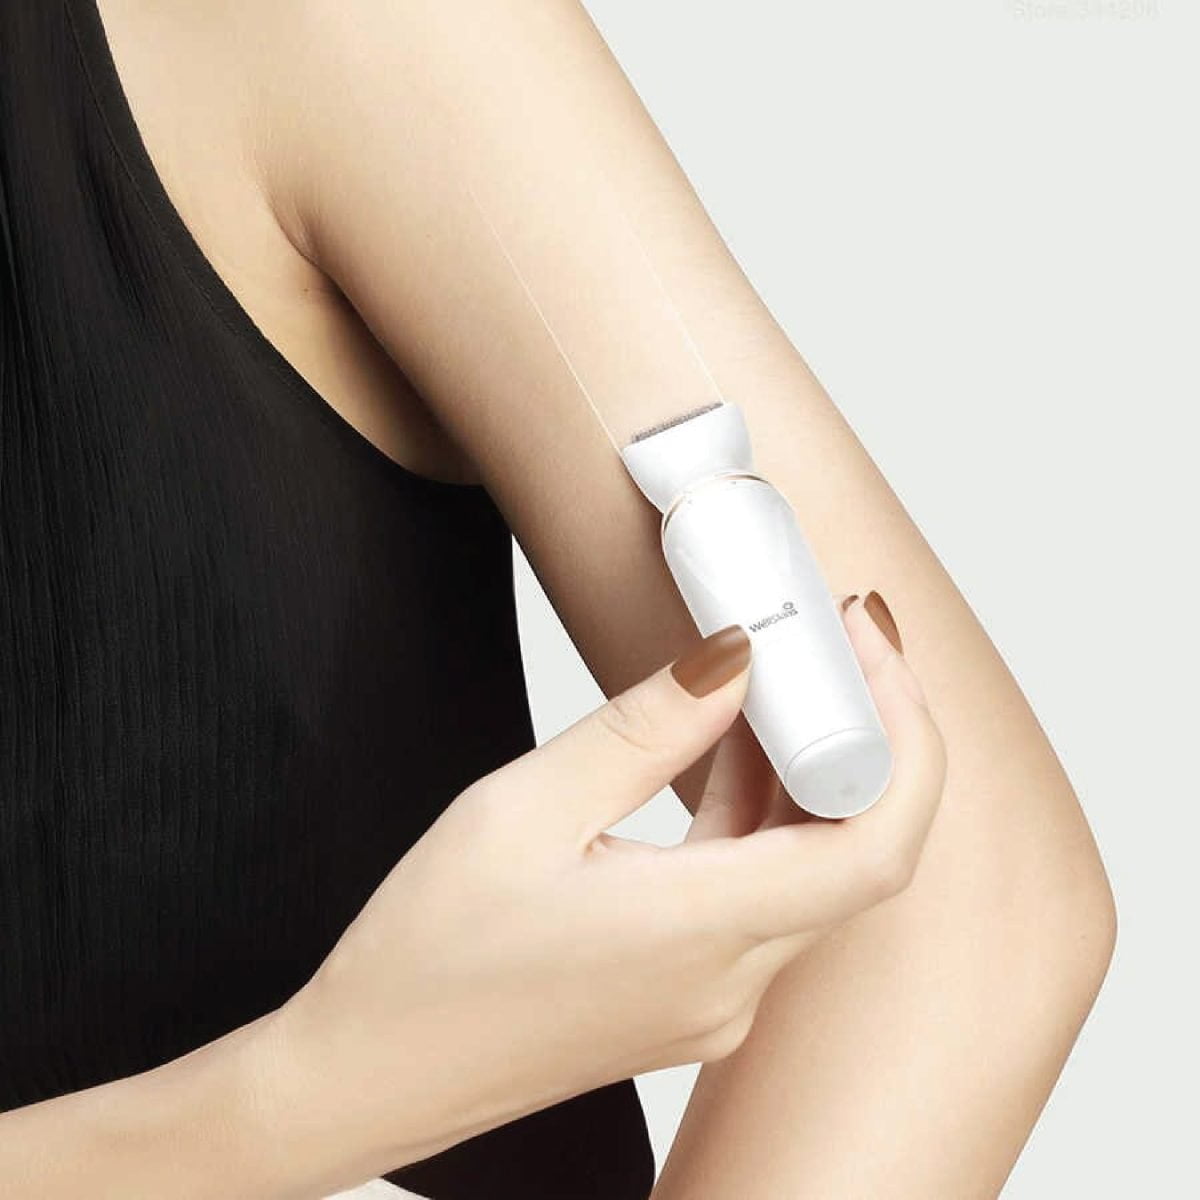 T3 04 Xiaomi Xiao Mi Youpin Wéllskins Electric Trimmer Repairer Shaver Body Hair Removal With Pivoting Head 30° Adjustable Cutter Head Hair Remover For Women Painless Lady Shaver 6-In-1 Https://Www.youtube.com/Watch?V=N-Wn12U3Uj4 Xiaomi Wellskins Wx-Tm01 Personal Beauty Trimmer